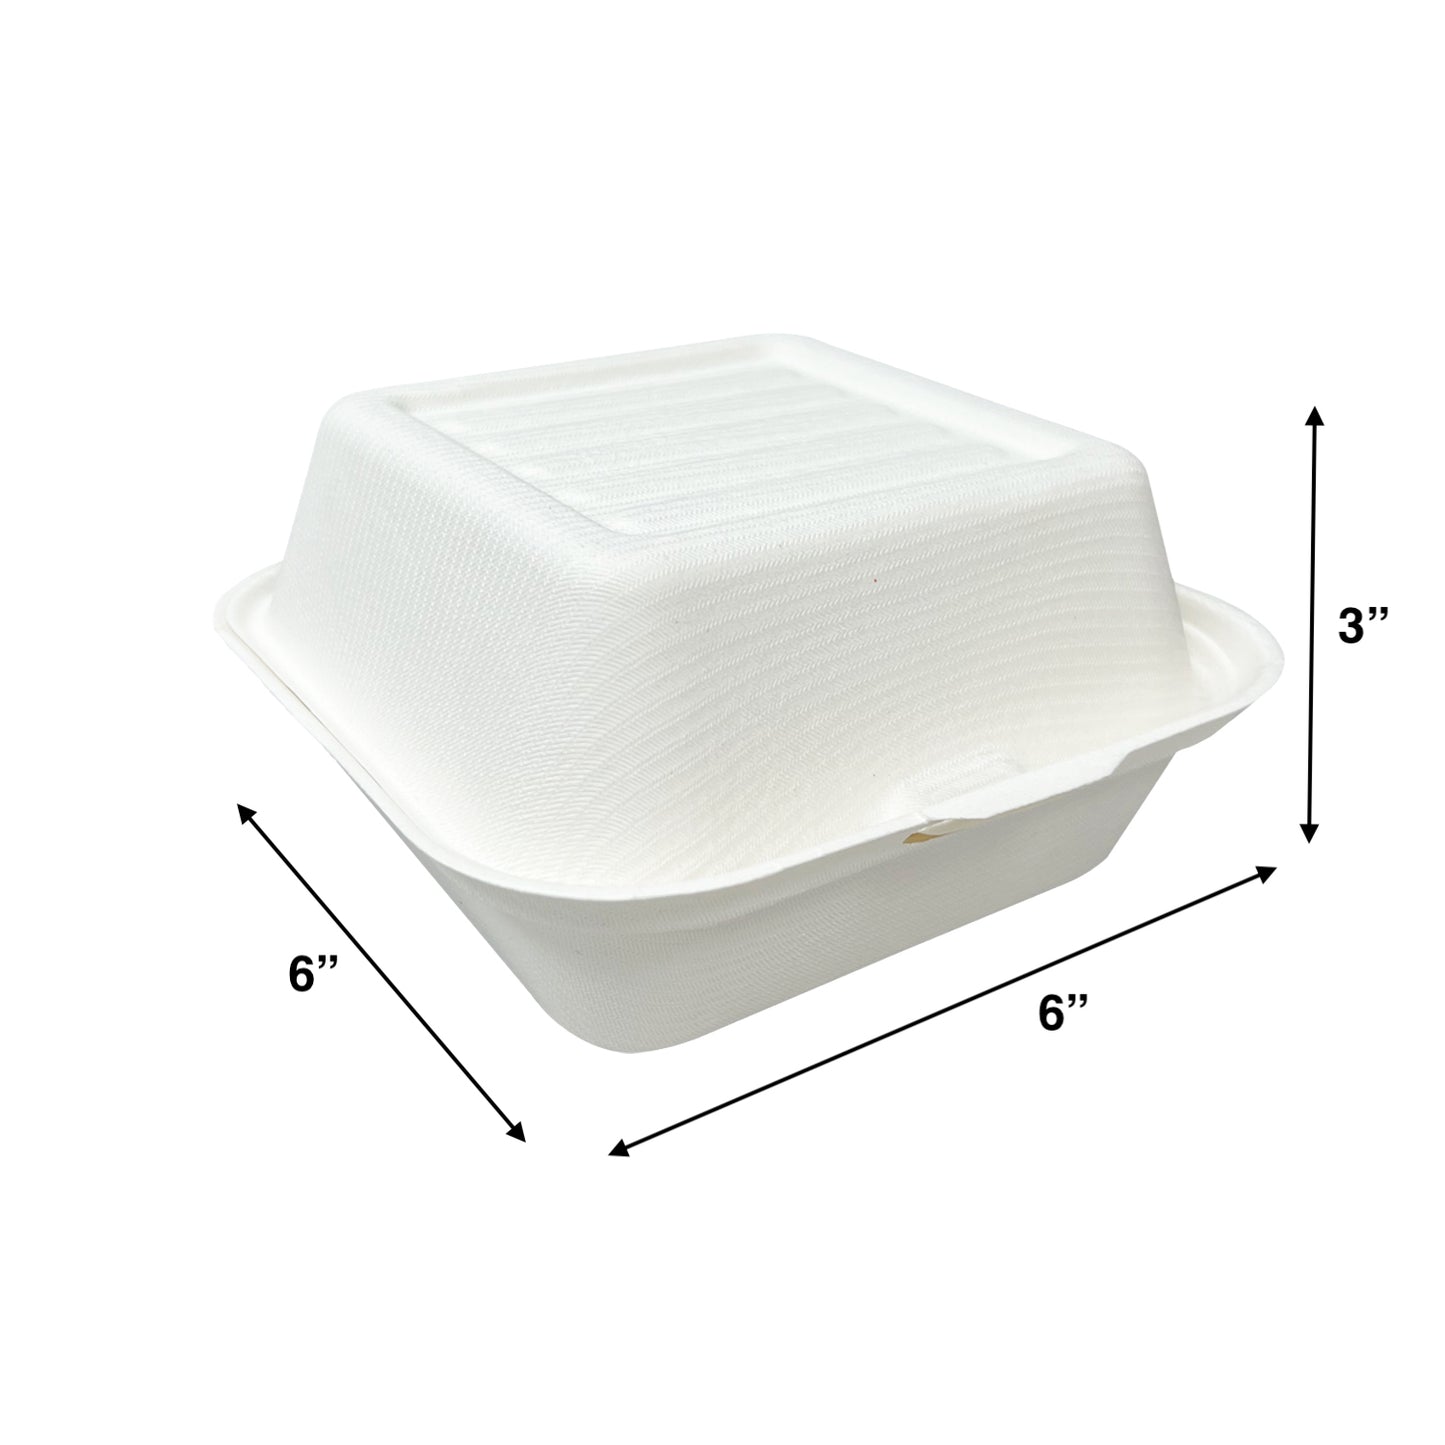 KIS-S6631 | 6x6x3 inches, 1-Compartment, Sugarcane Clamshell Food Container; $0.110/pc